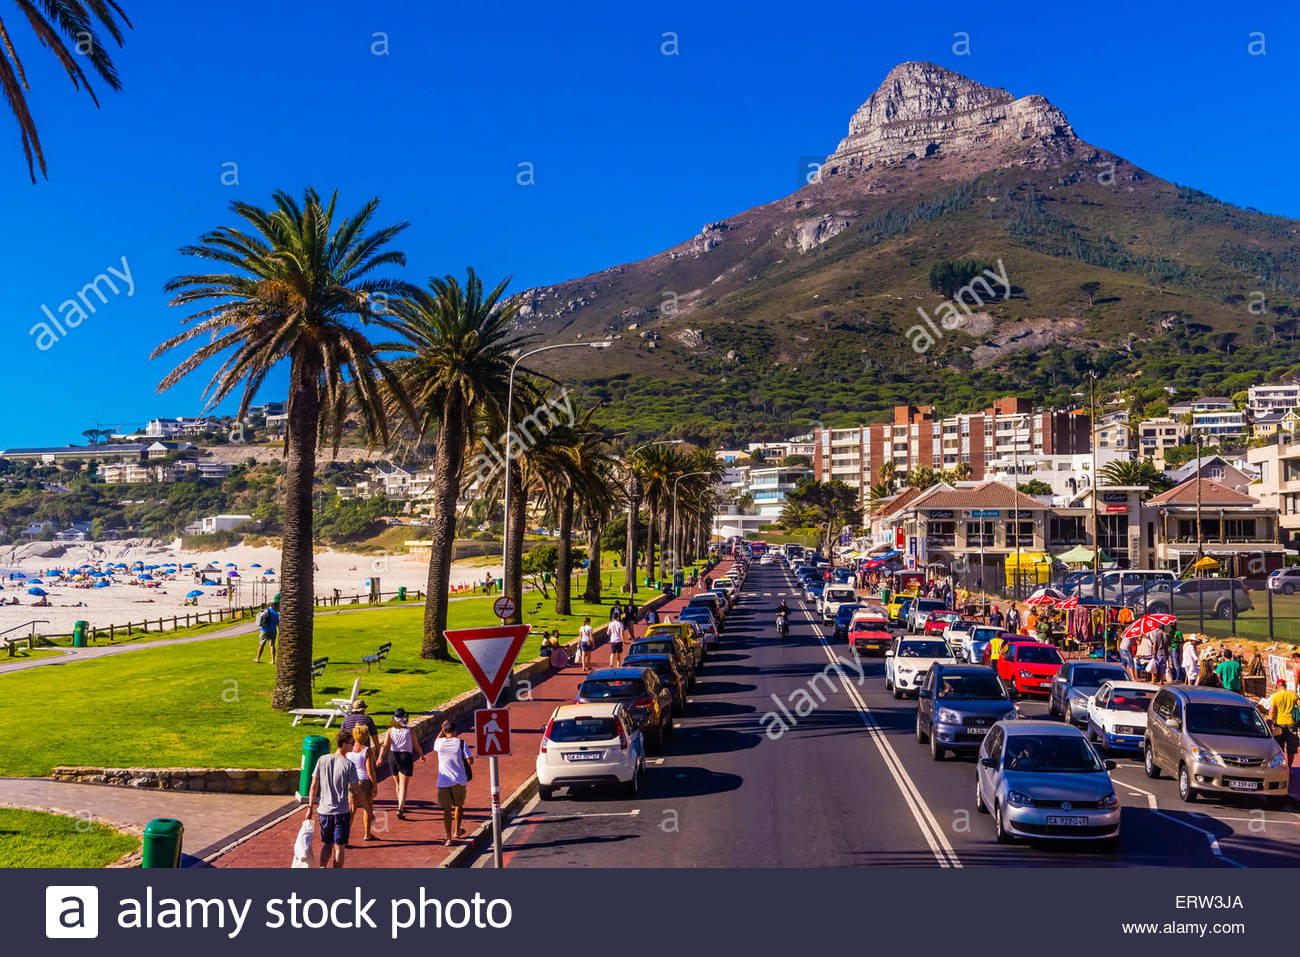 Camps Bay, Cape Town, South Africa Stock Photo: 83530226 - Alamy